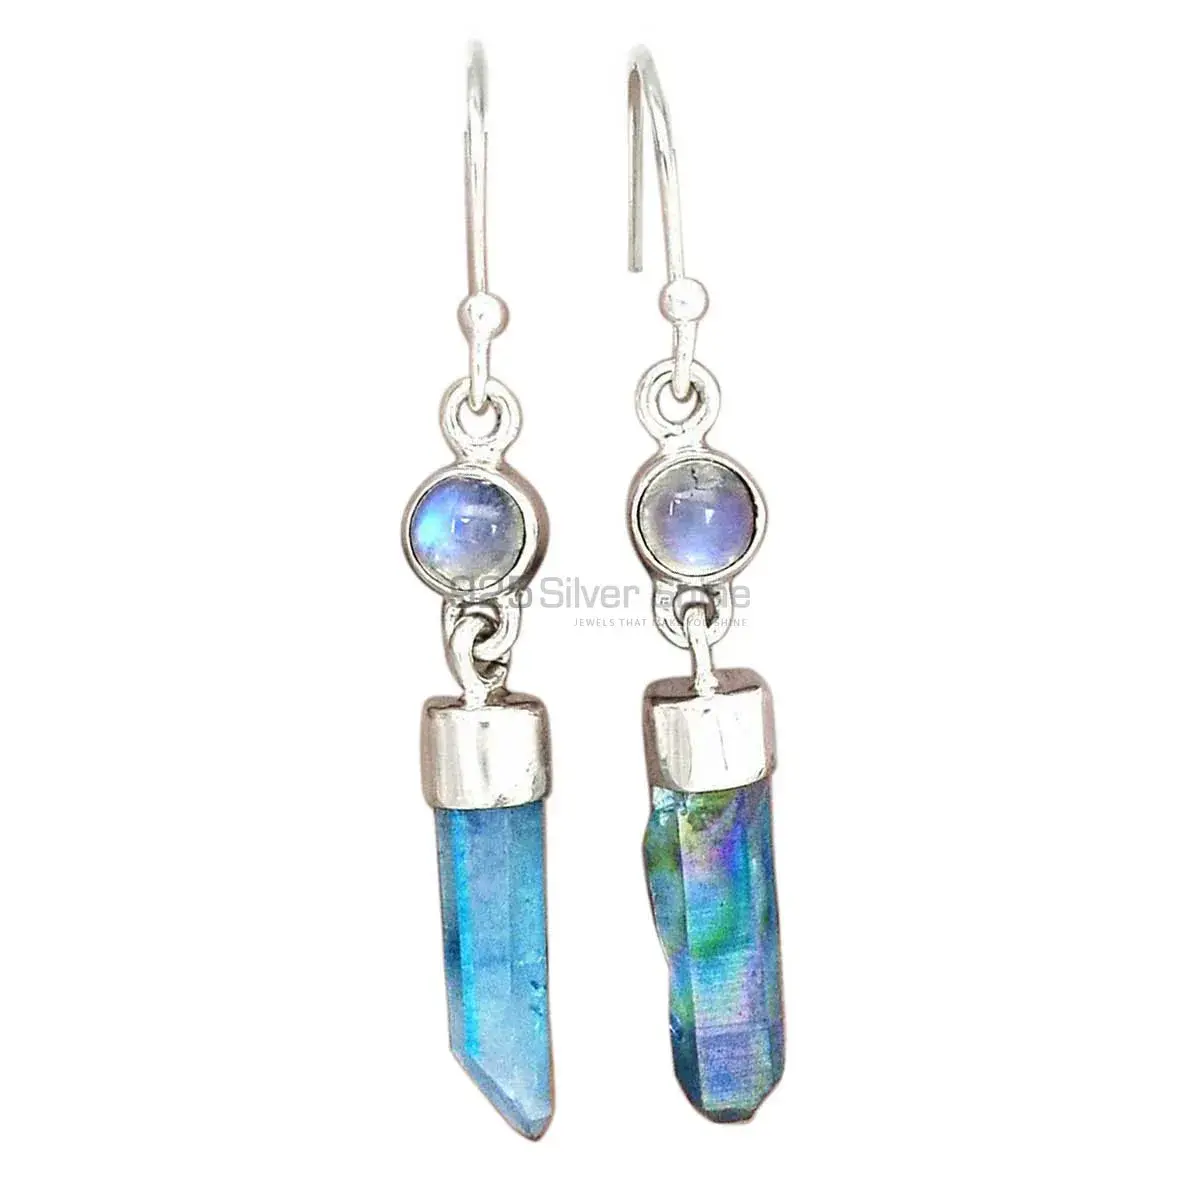 Affordable 925 Sterling Silver Handmade Earrings Suppliers In Rainbow-Apatite Gemstone Jewelry 925SE2707